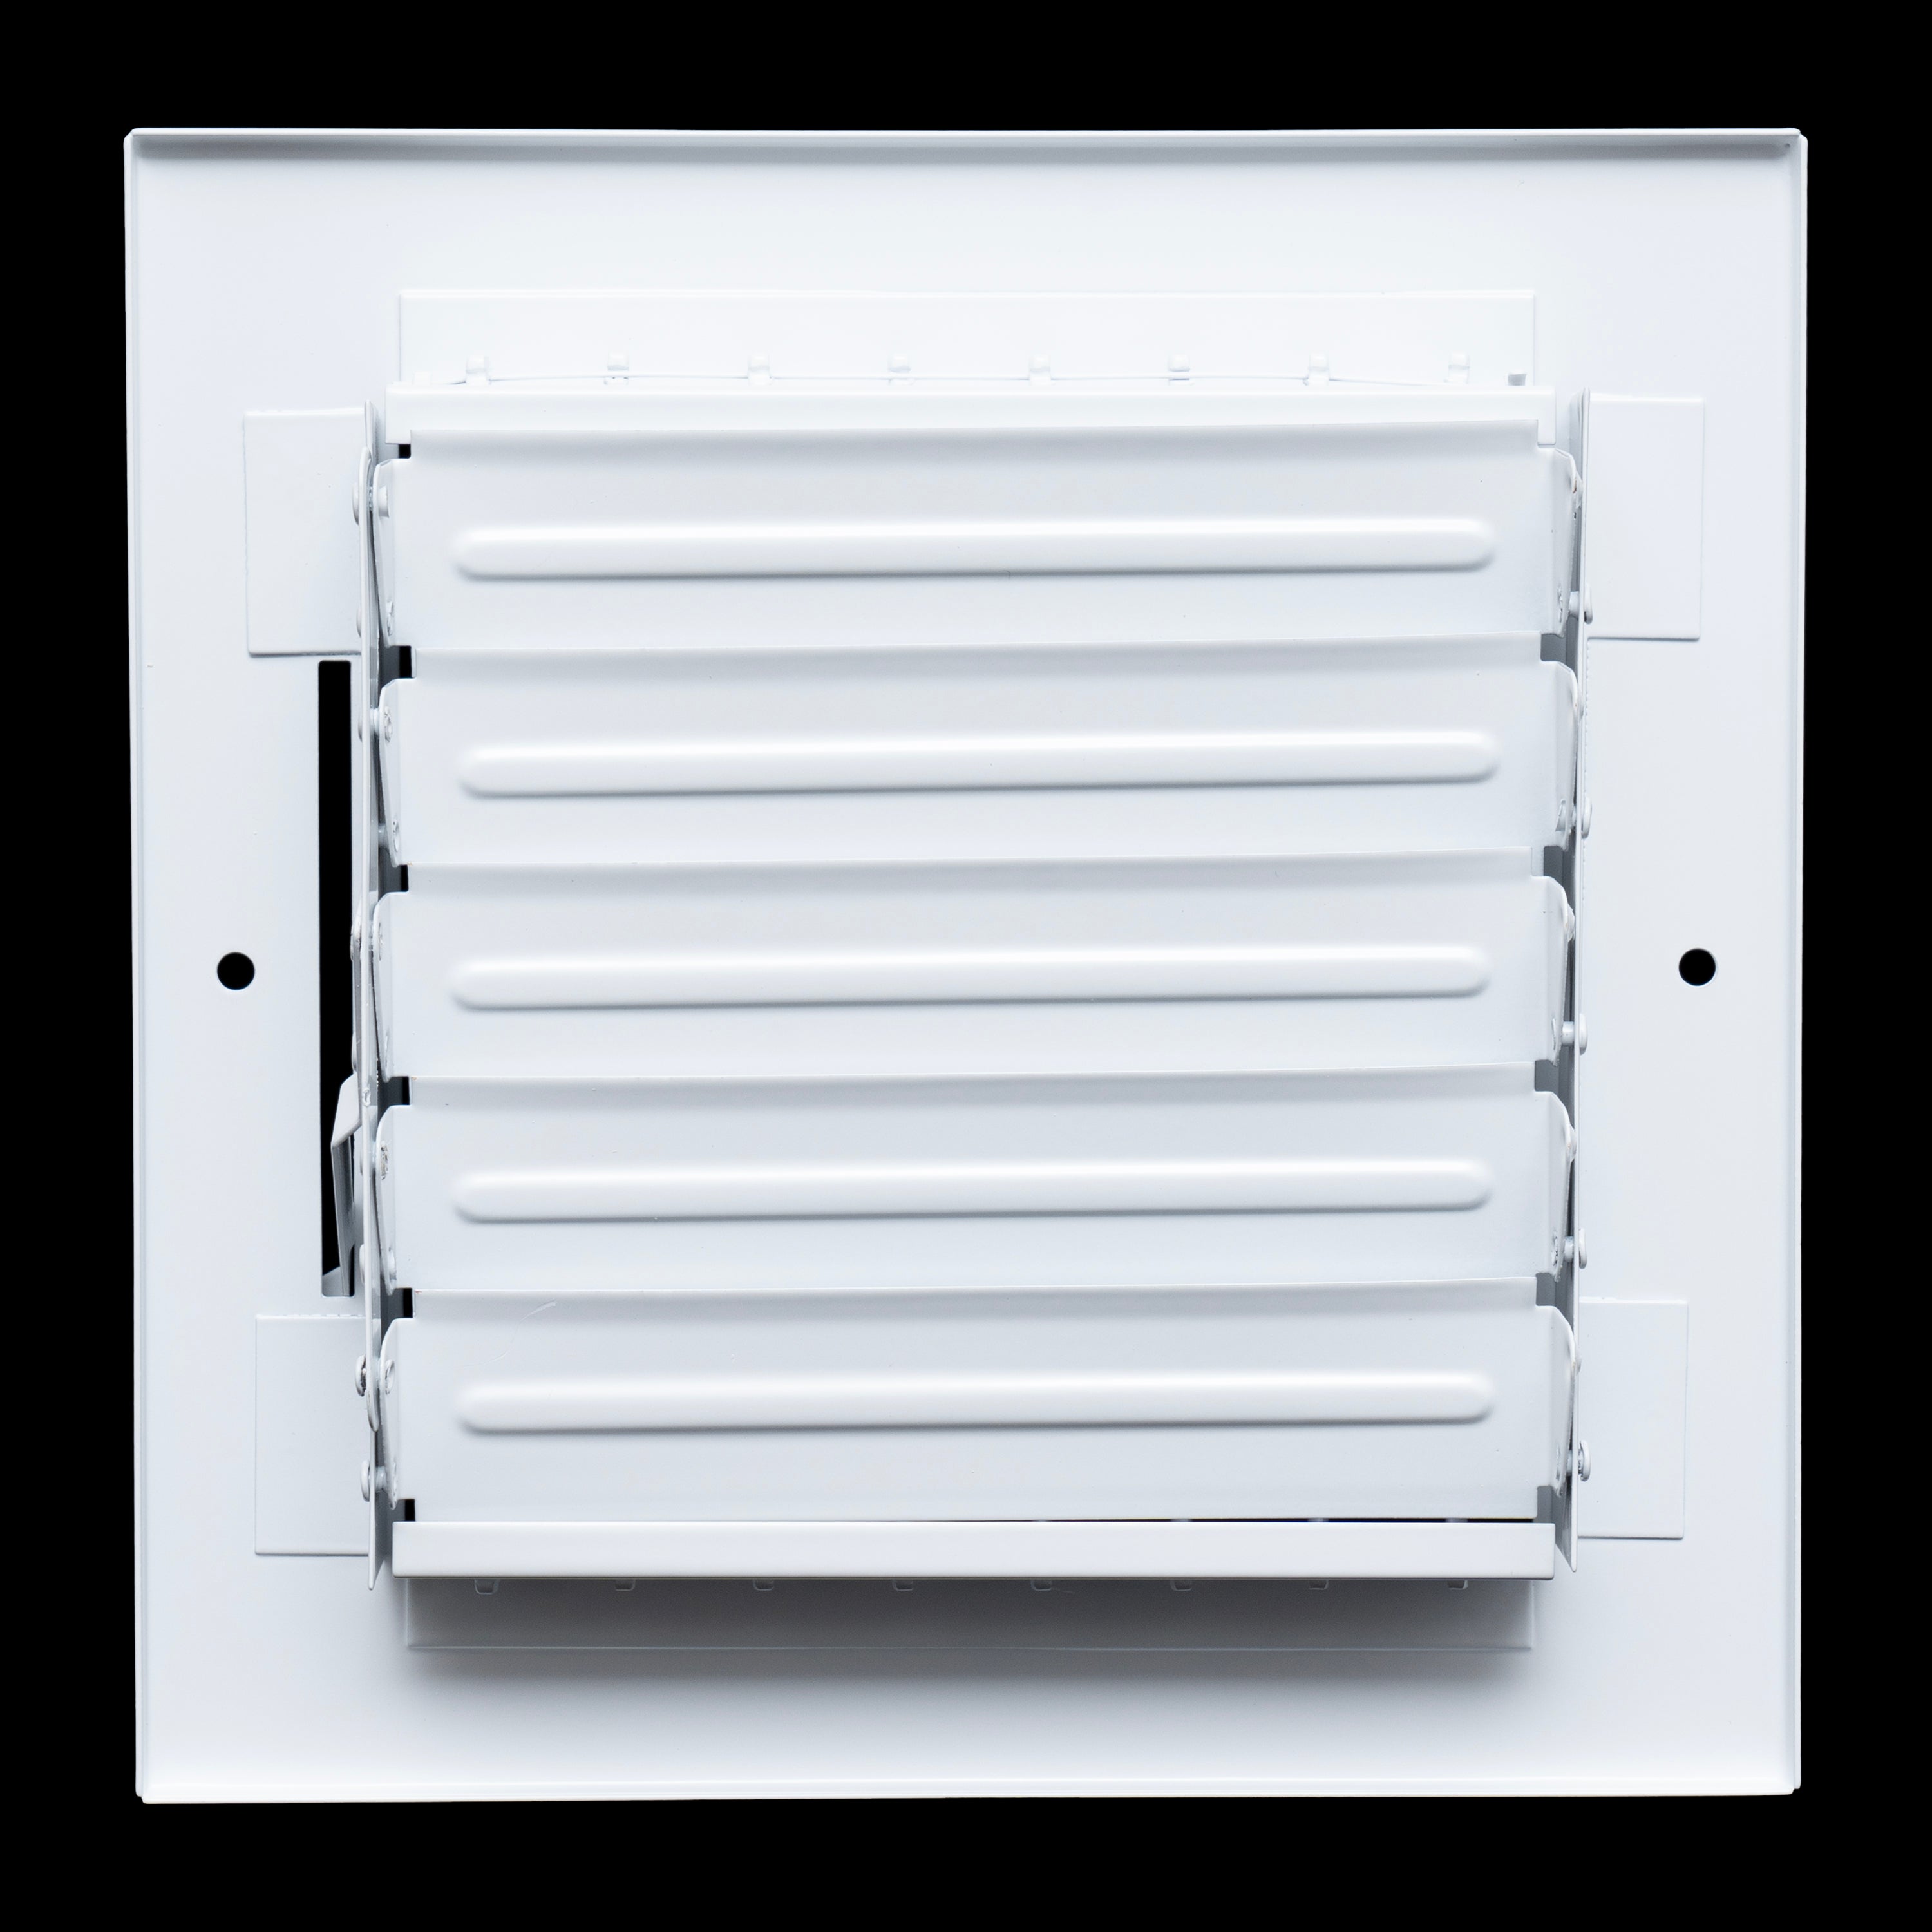 6"W x 6"H  Steel Adjustable Air Supply Grille | Register Vent Cover Grill for Sidewall and Ceiling | White | Outer Dimensions: 7.75"W X 7.75"H for 6x6 Duct Opening